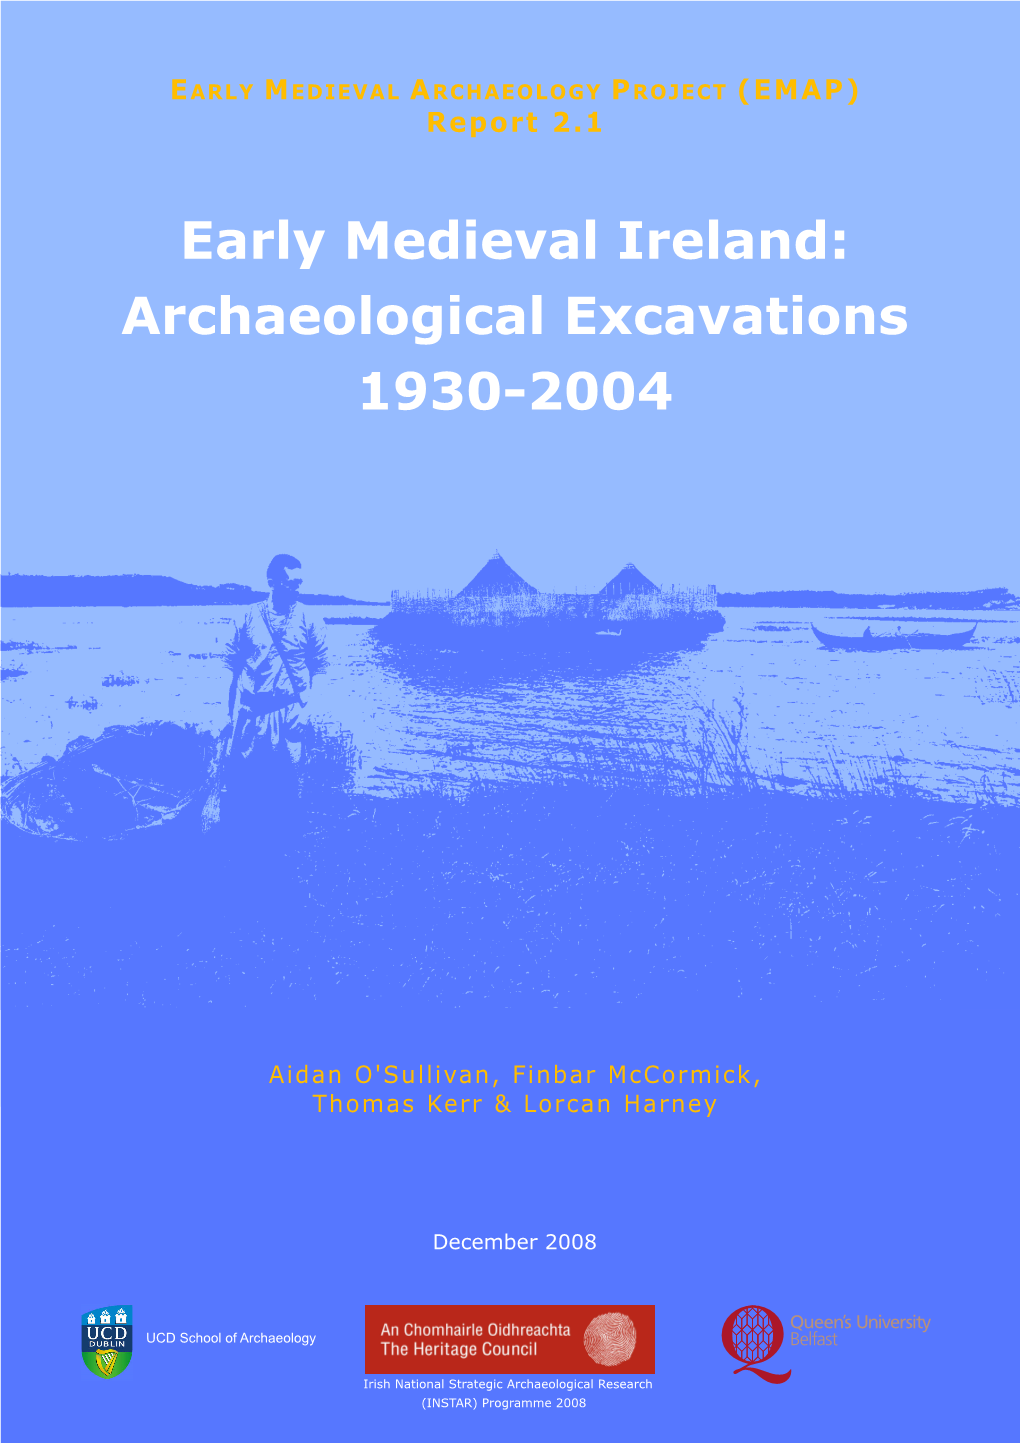 Early Medieval Ireland: Archaeological Excavations 1930-2004